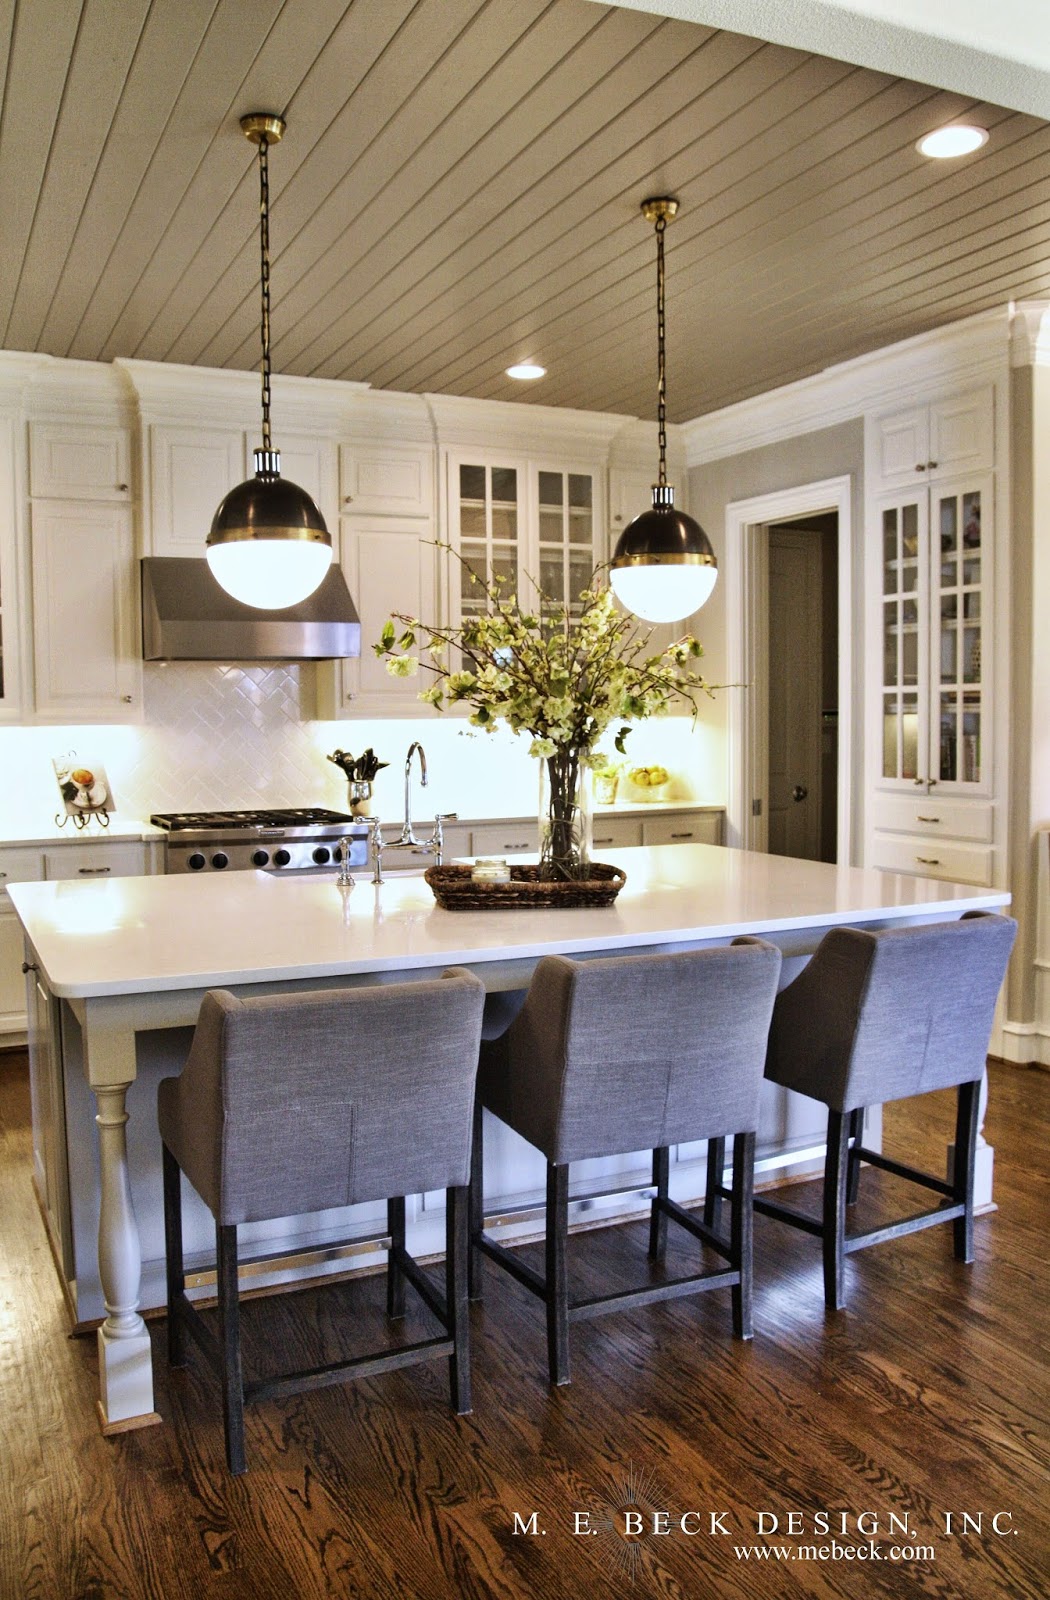 Live Beautifully: Dallas Project | The Kitchen